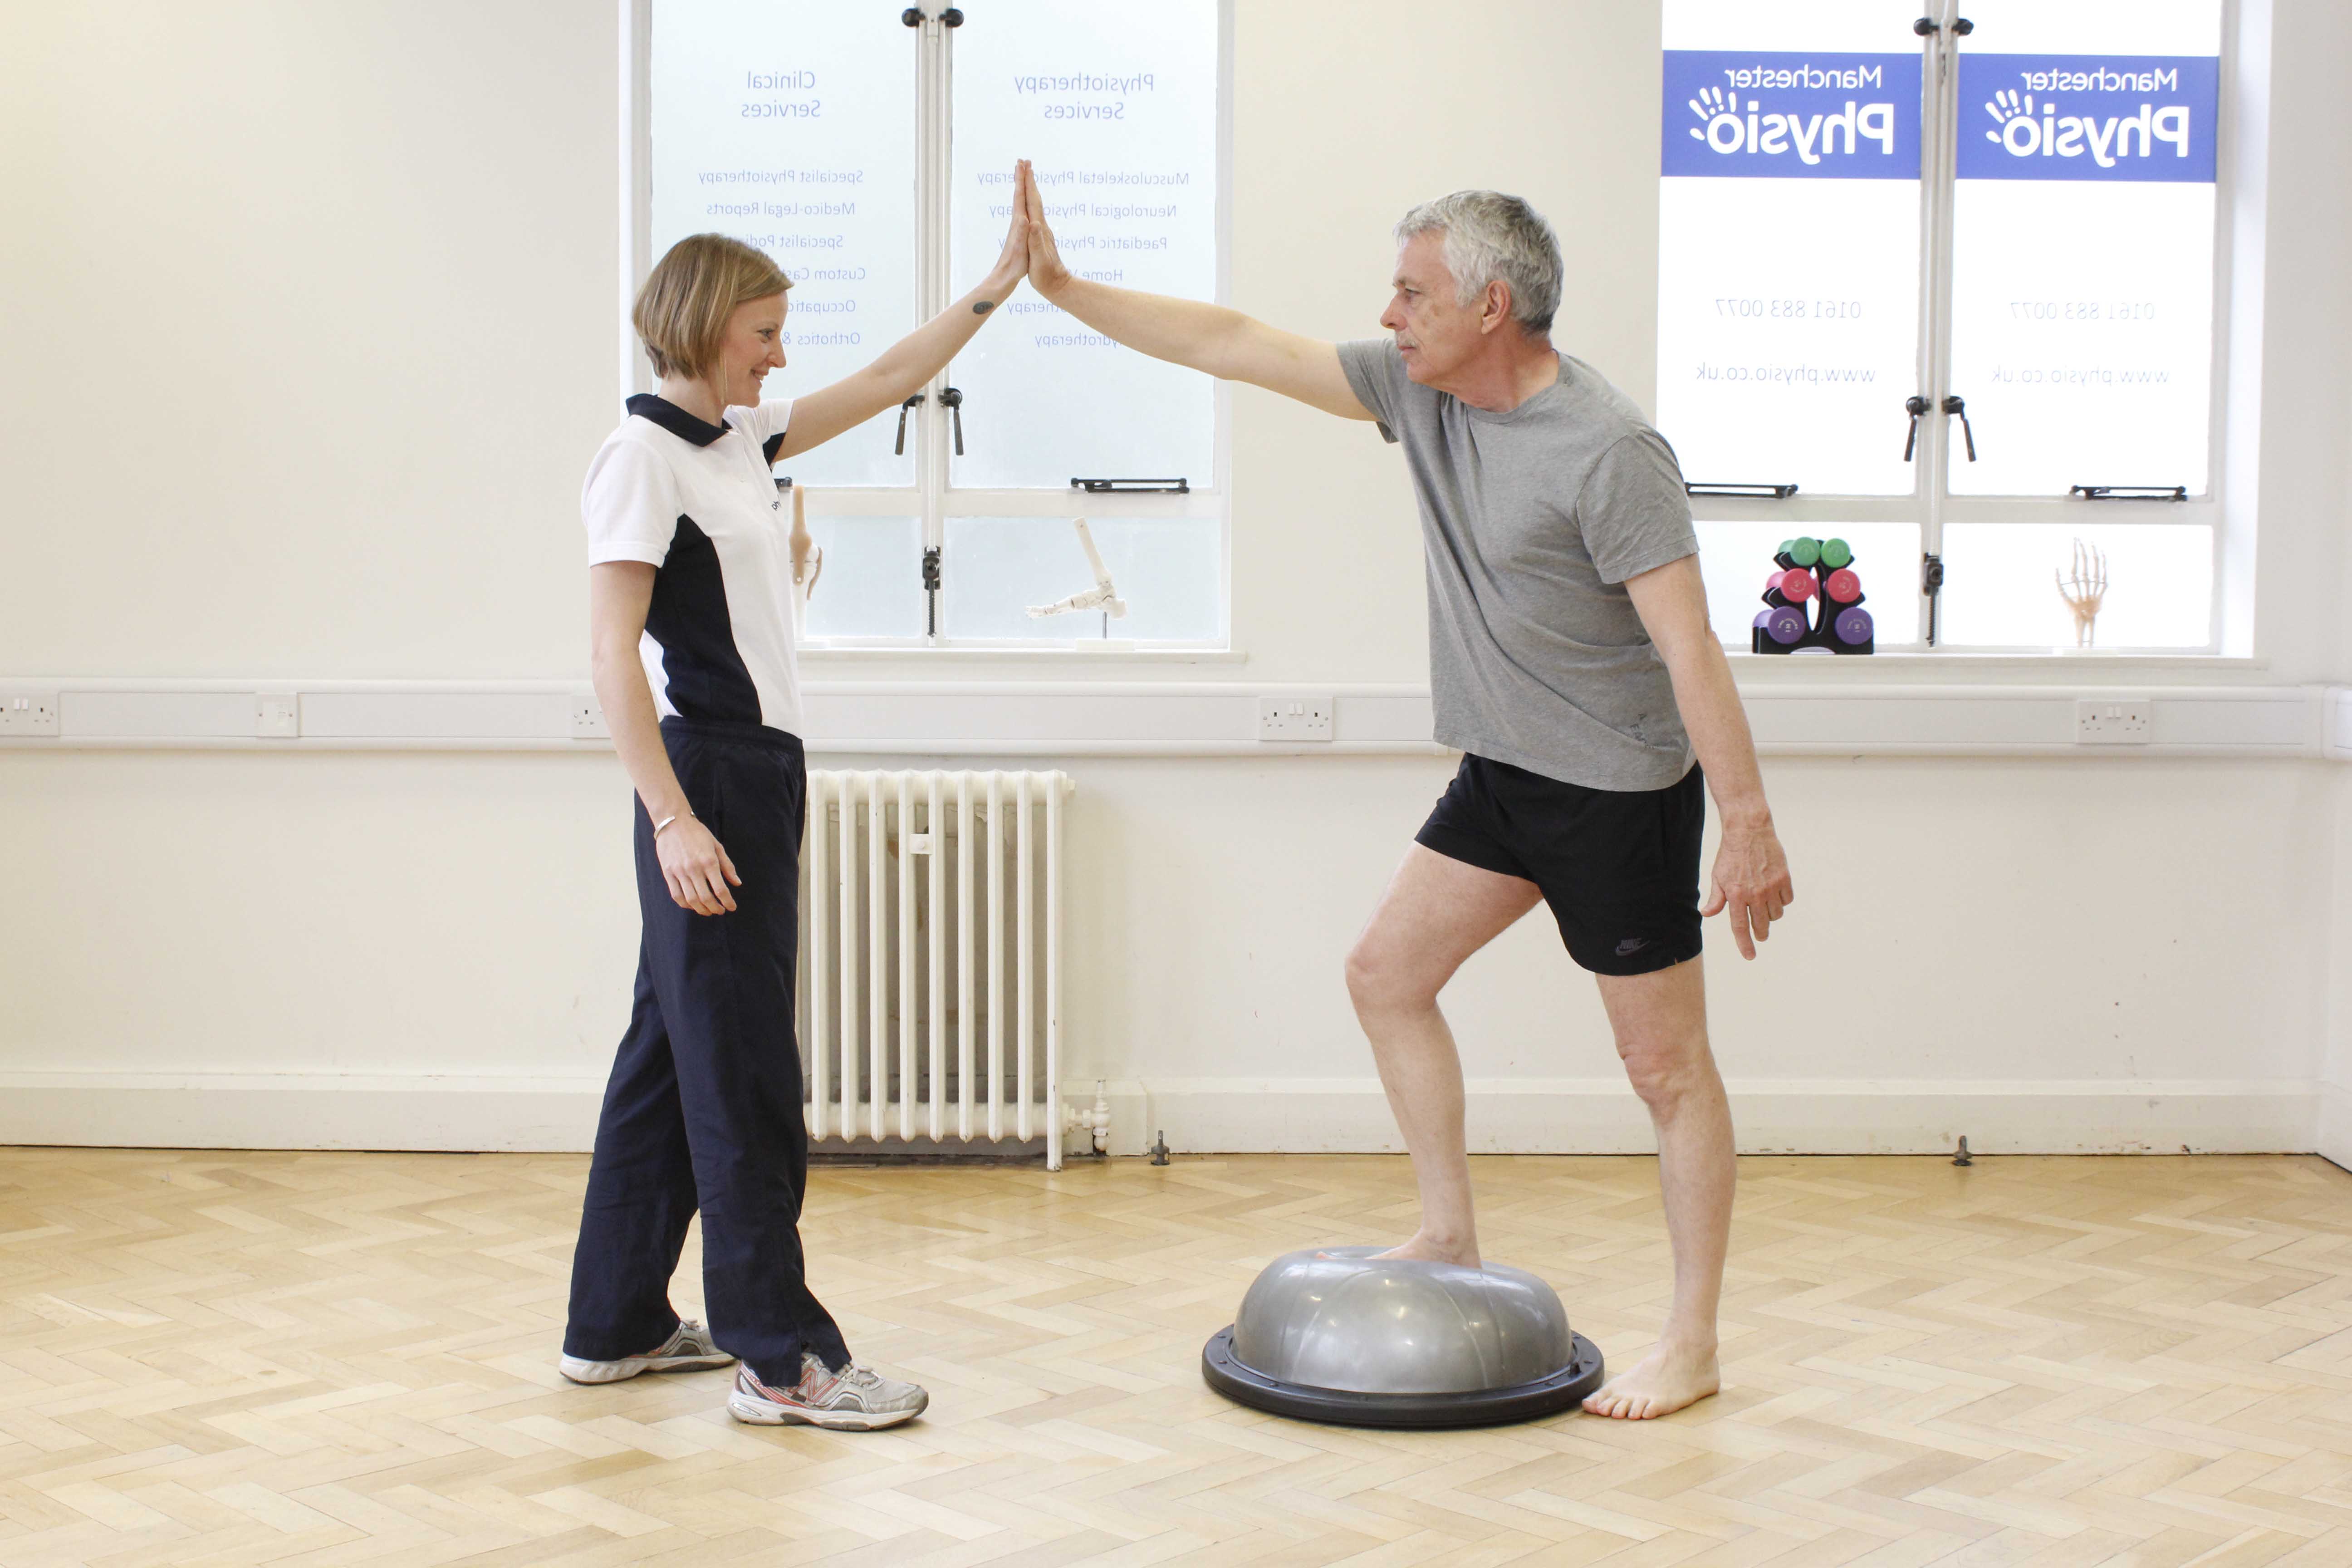 Physiotherapist led stability training to reduce risk of falls